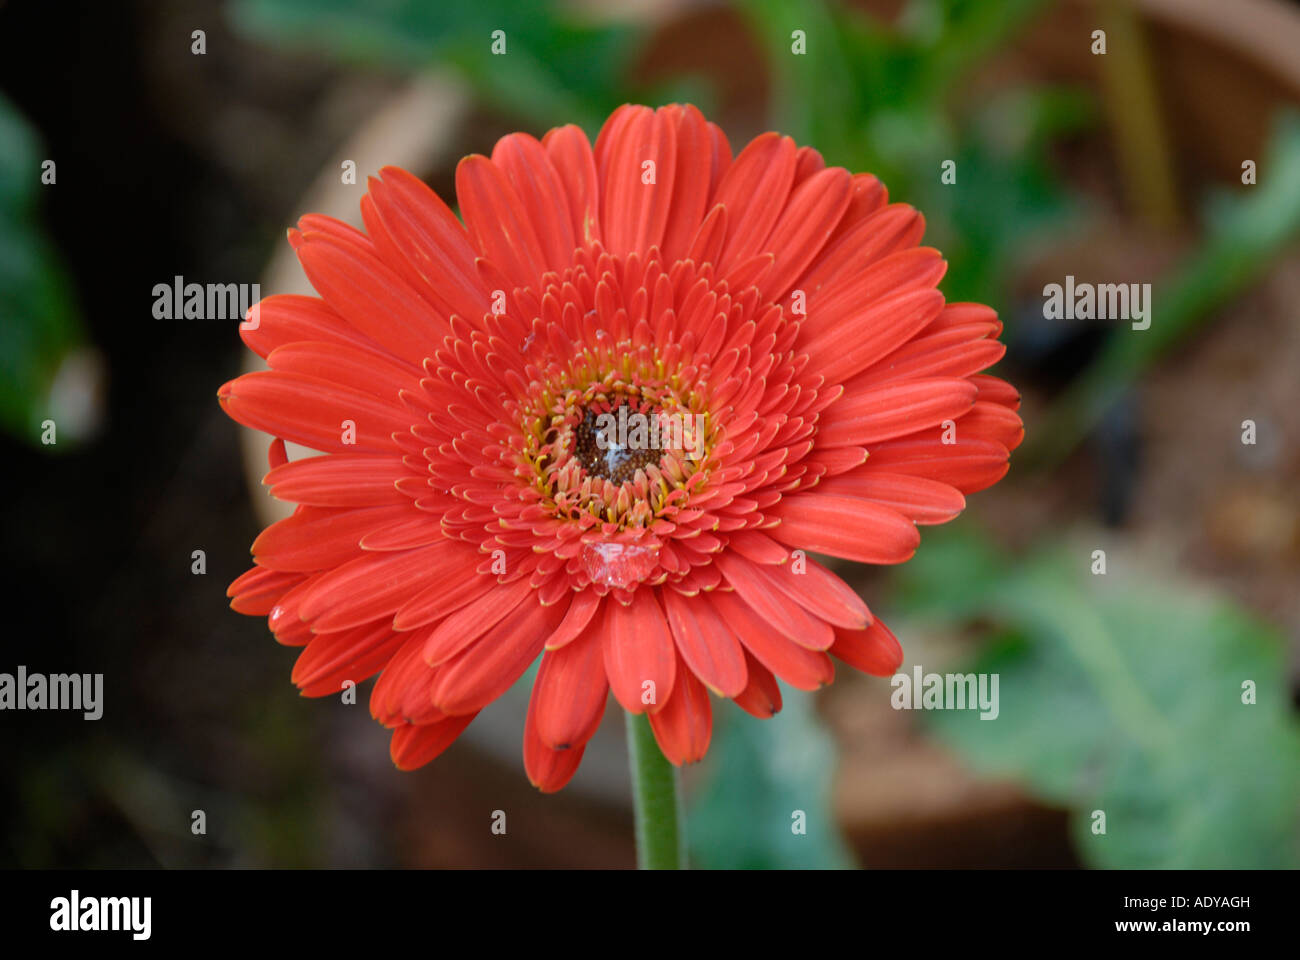 Red Gerber daisy flower close up Stock Photo